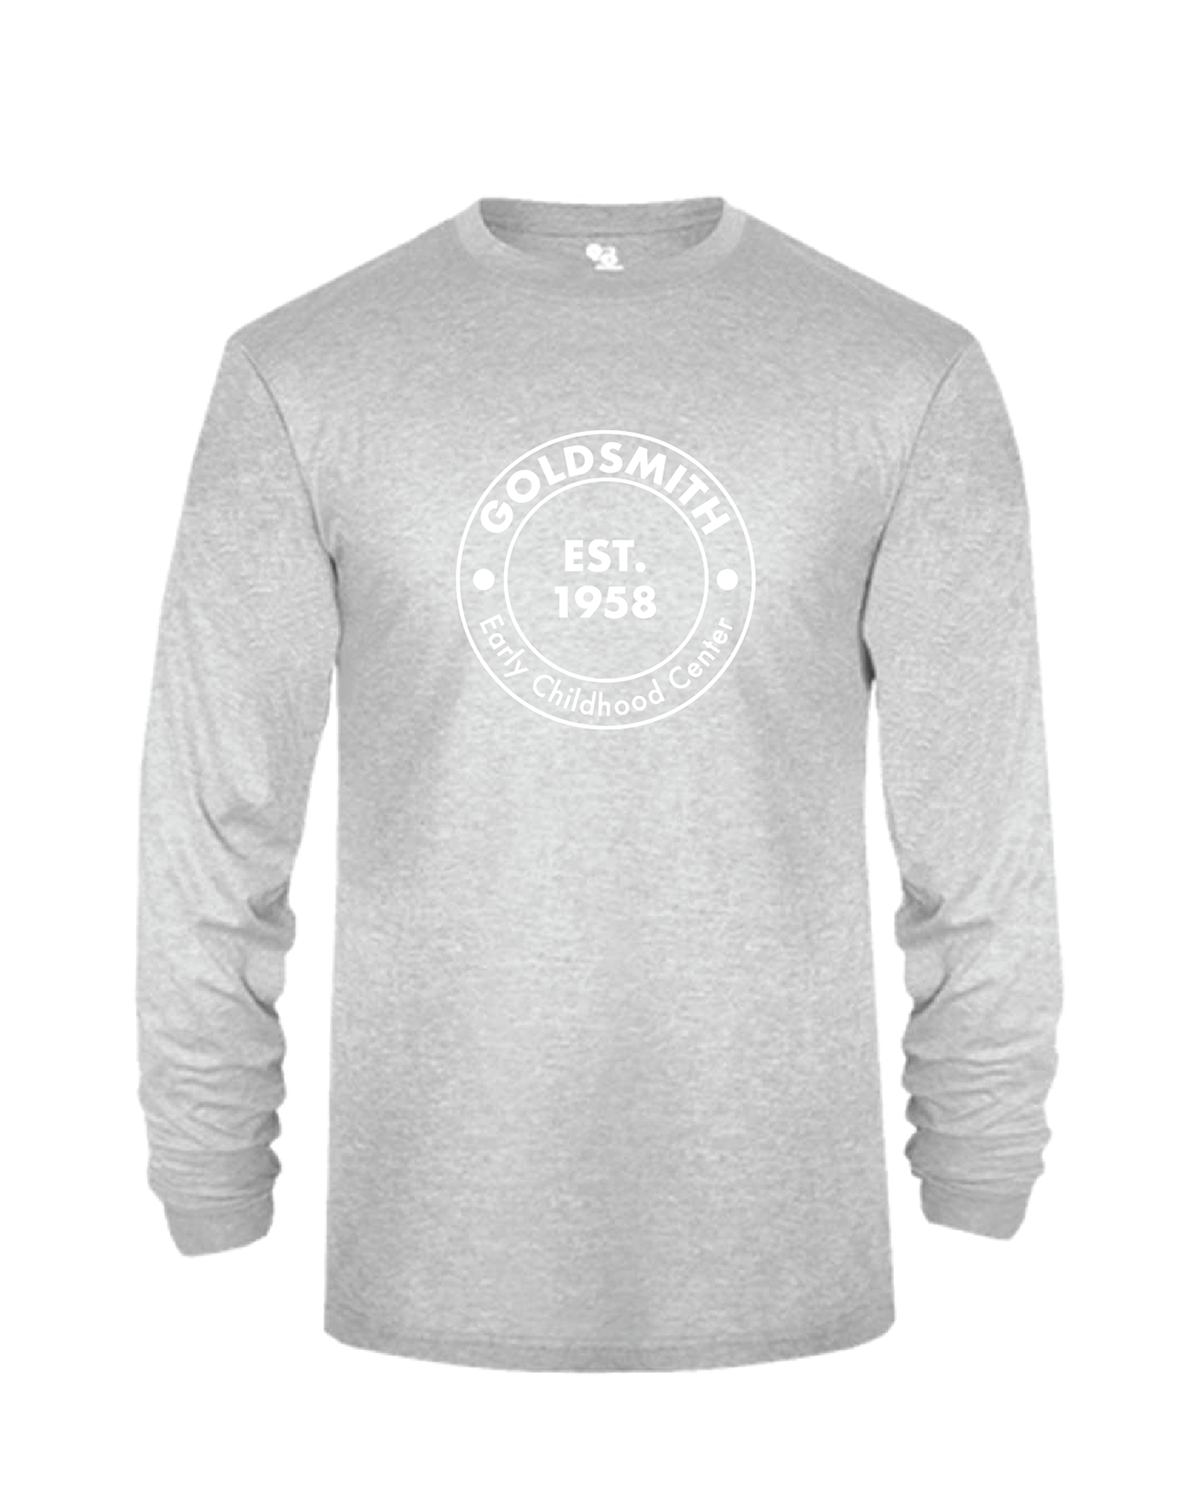 Youth Tri-Blend Long Sleeved with Round Logo